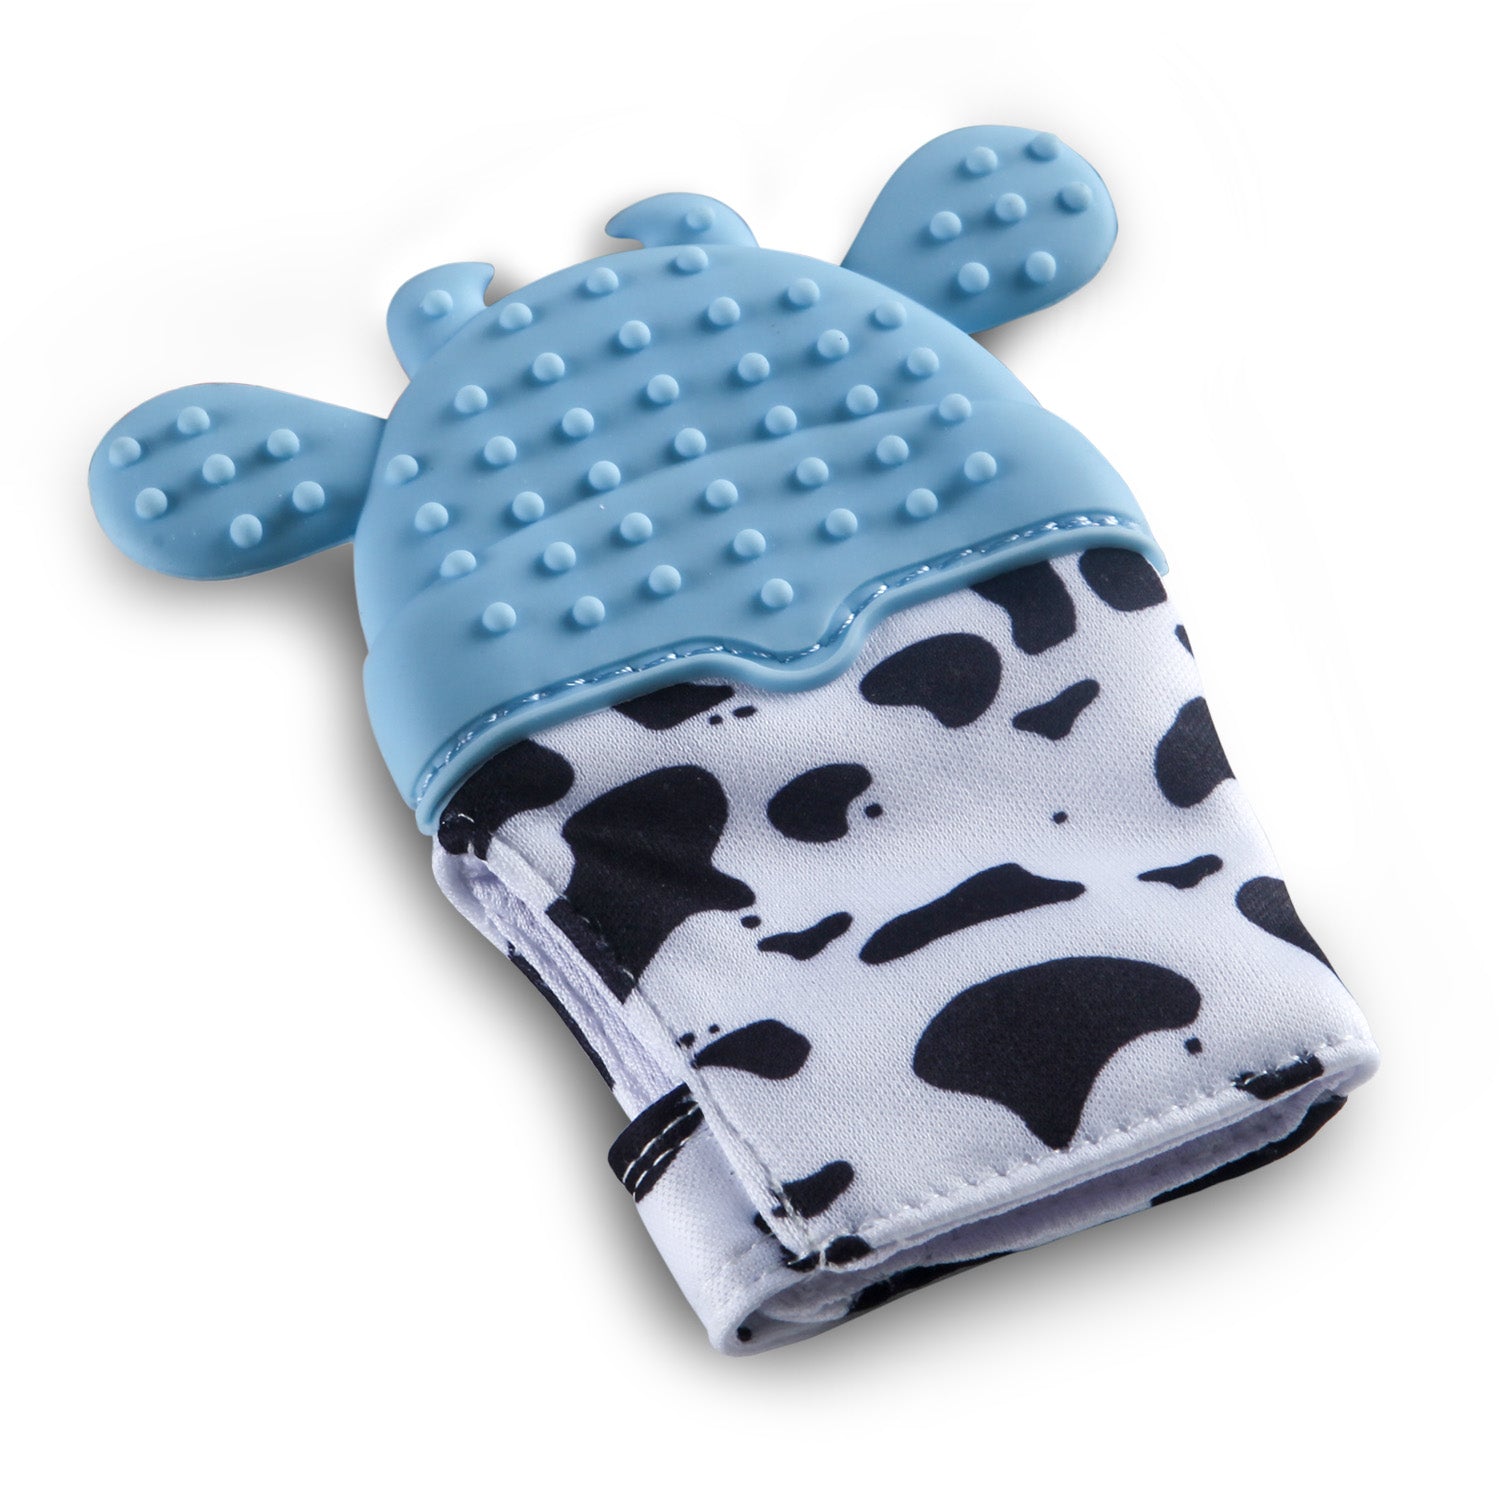 Teething Mitten Silicone Self Soothing Glove 1 Pc Cow Shape - Blue